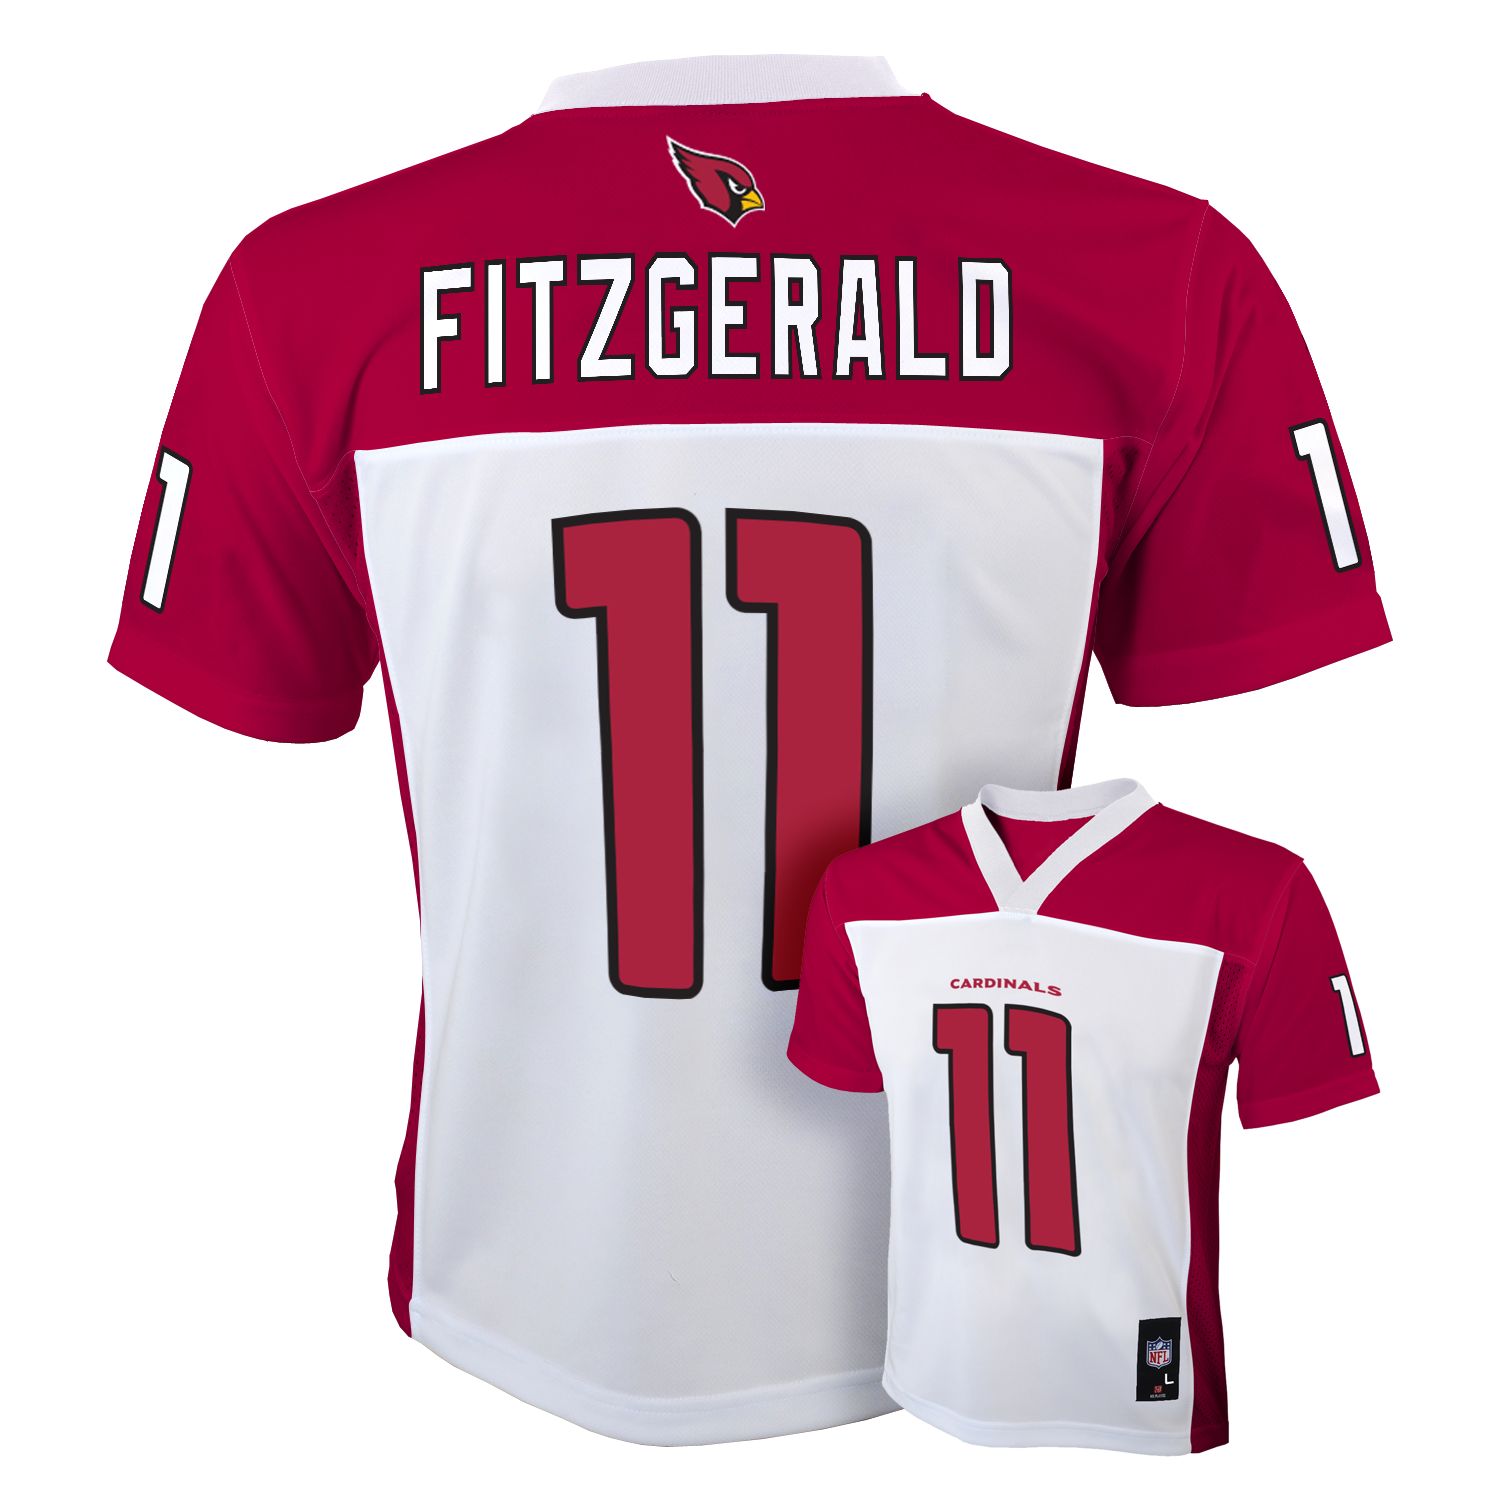 number 8 on cardinals jersey